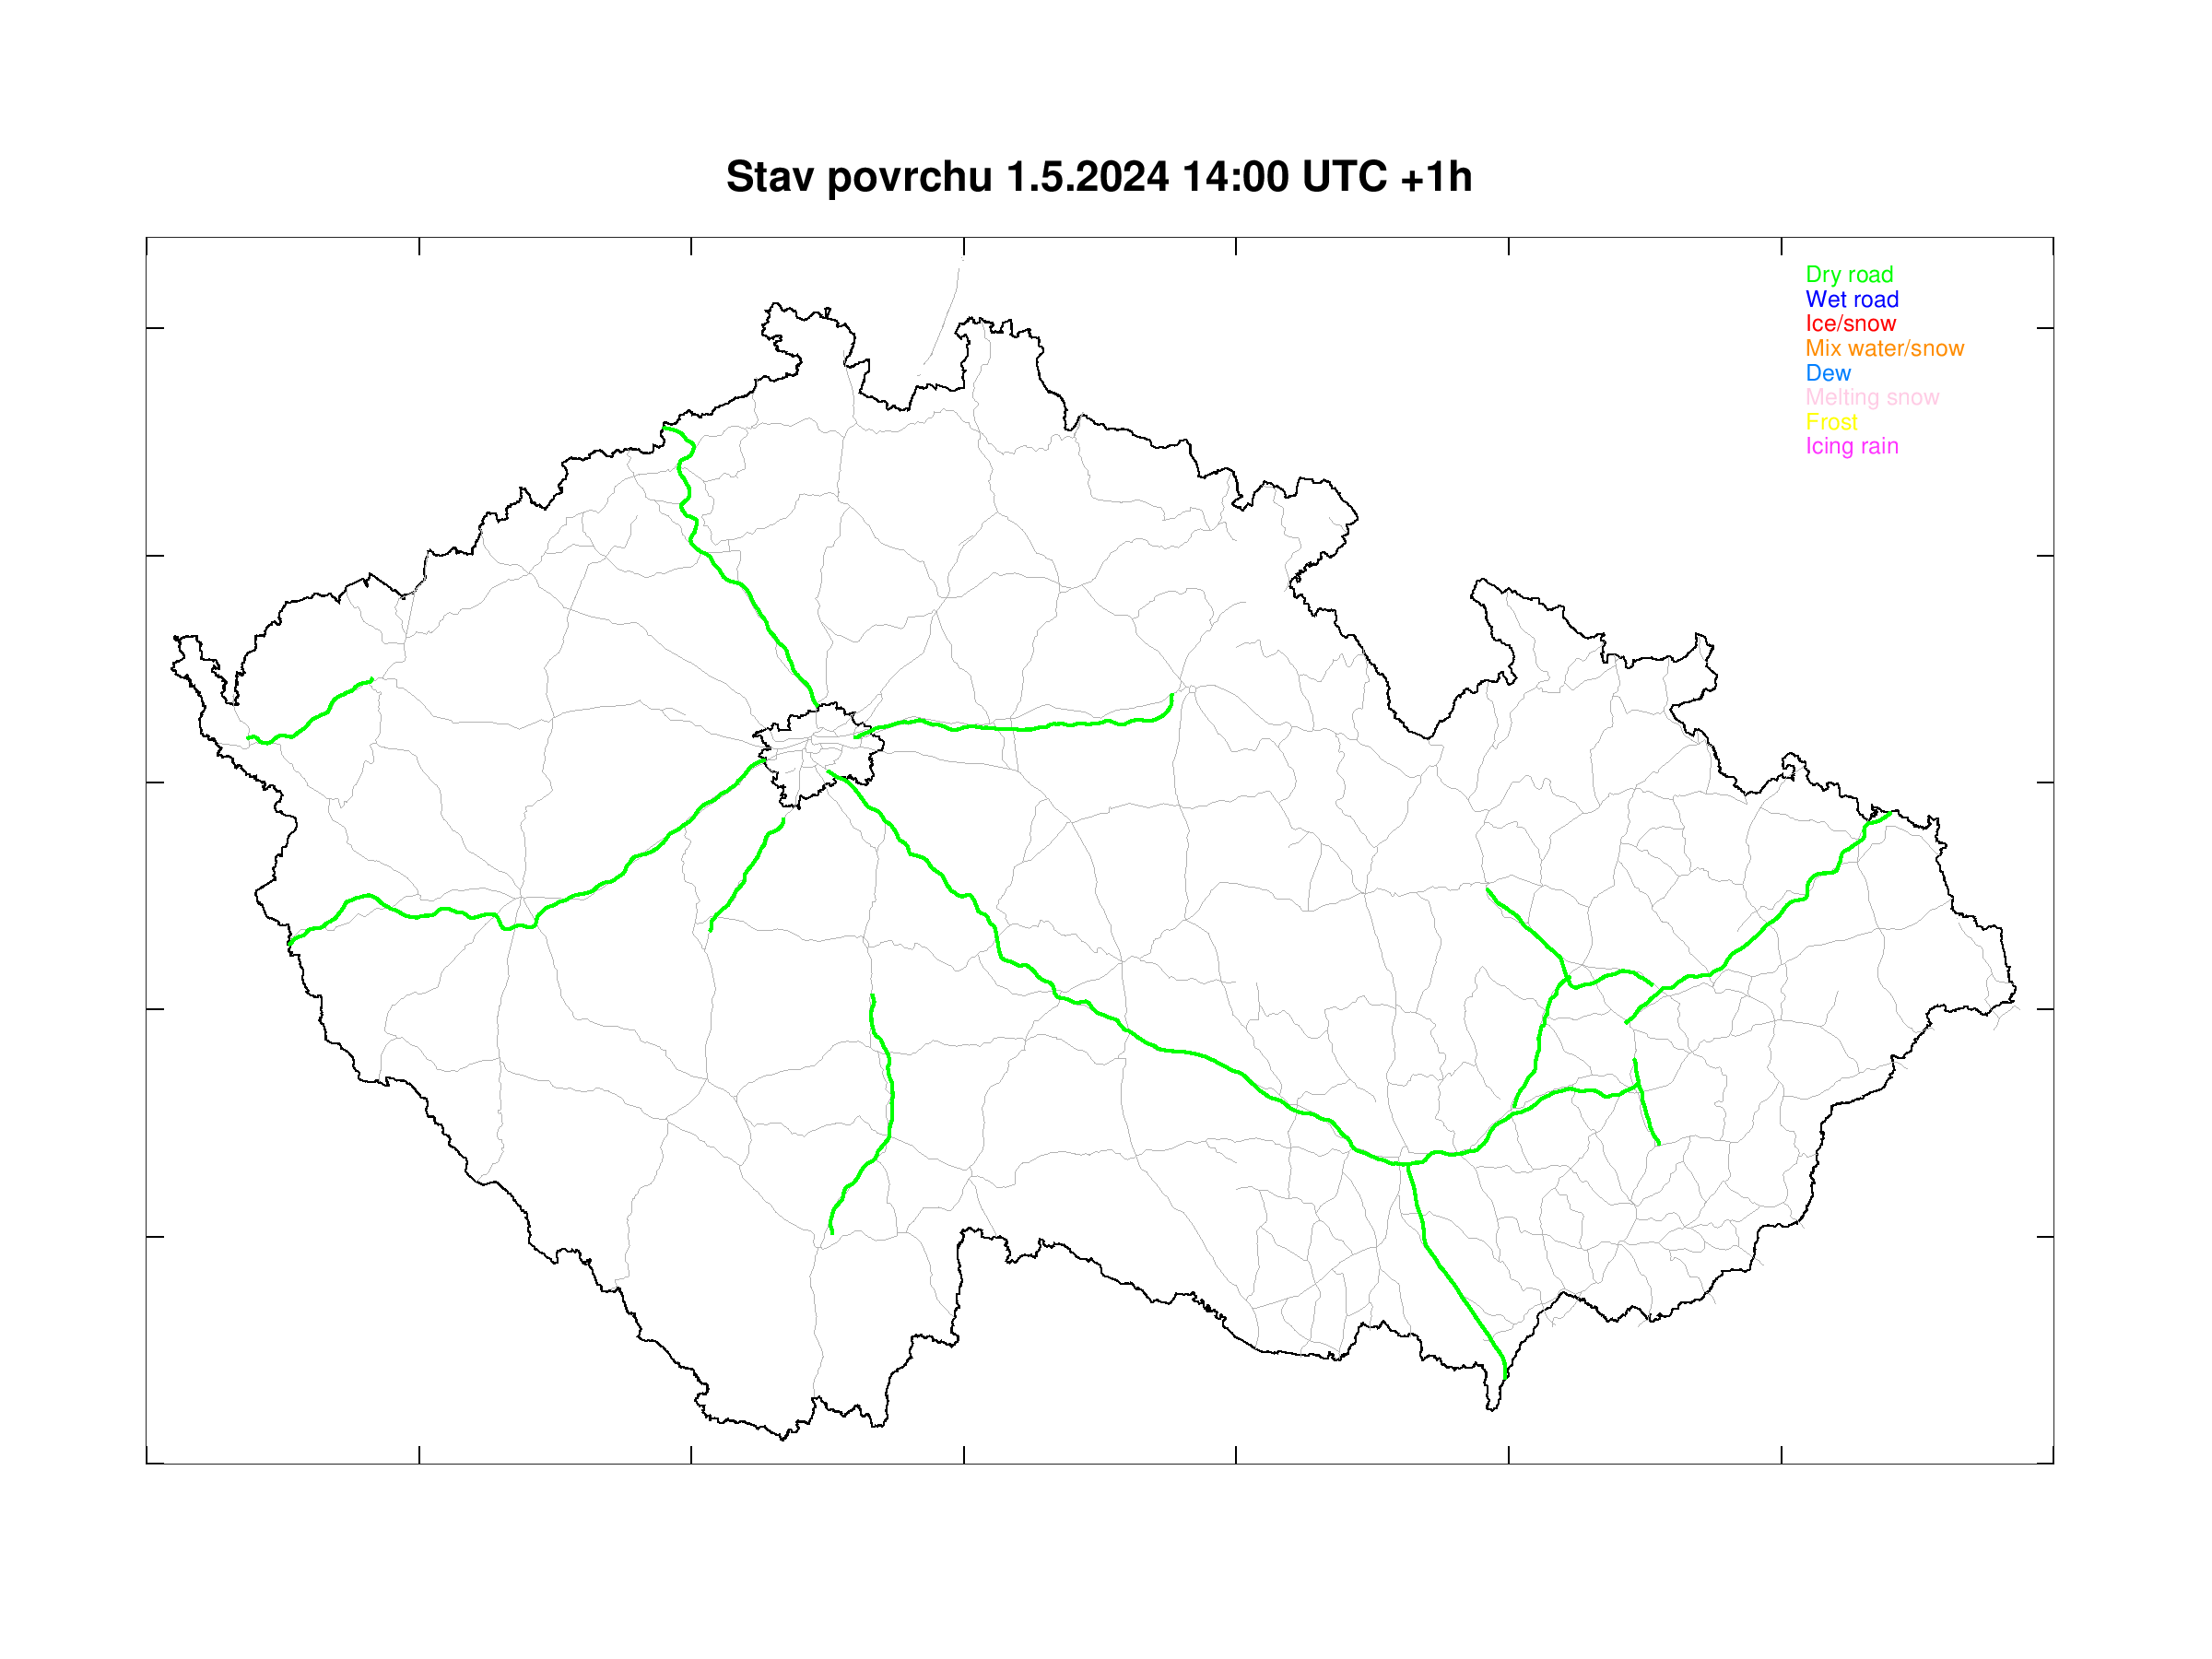 Road surface condition forecast for Czech highways +1h